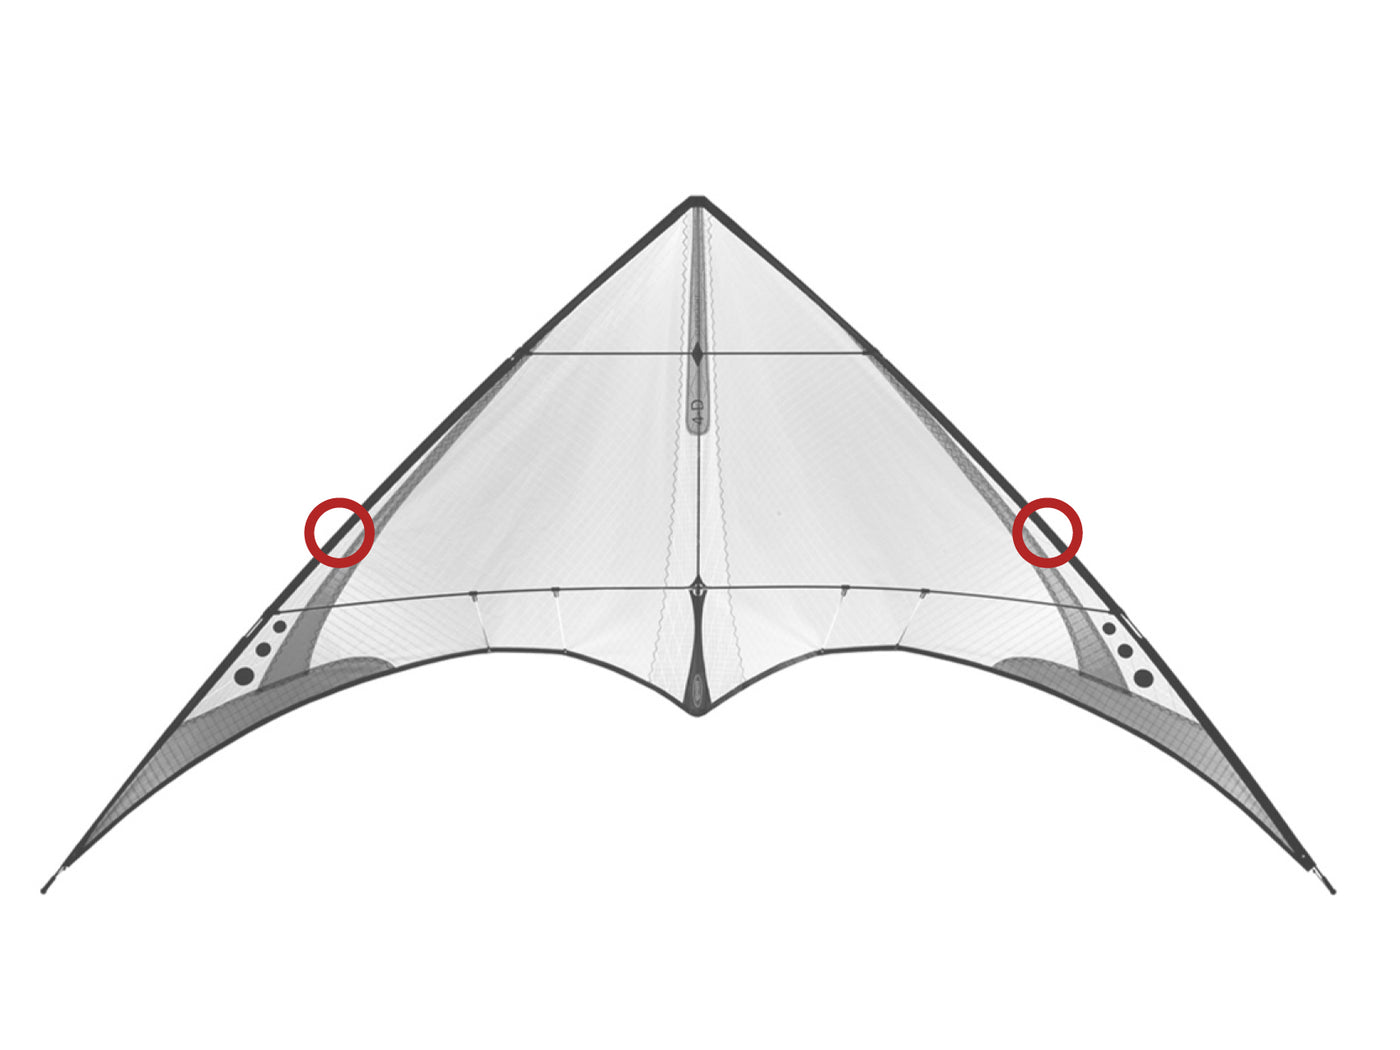 Diagram showing location of the 4-D Ferrule on the kite.